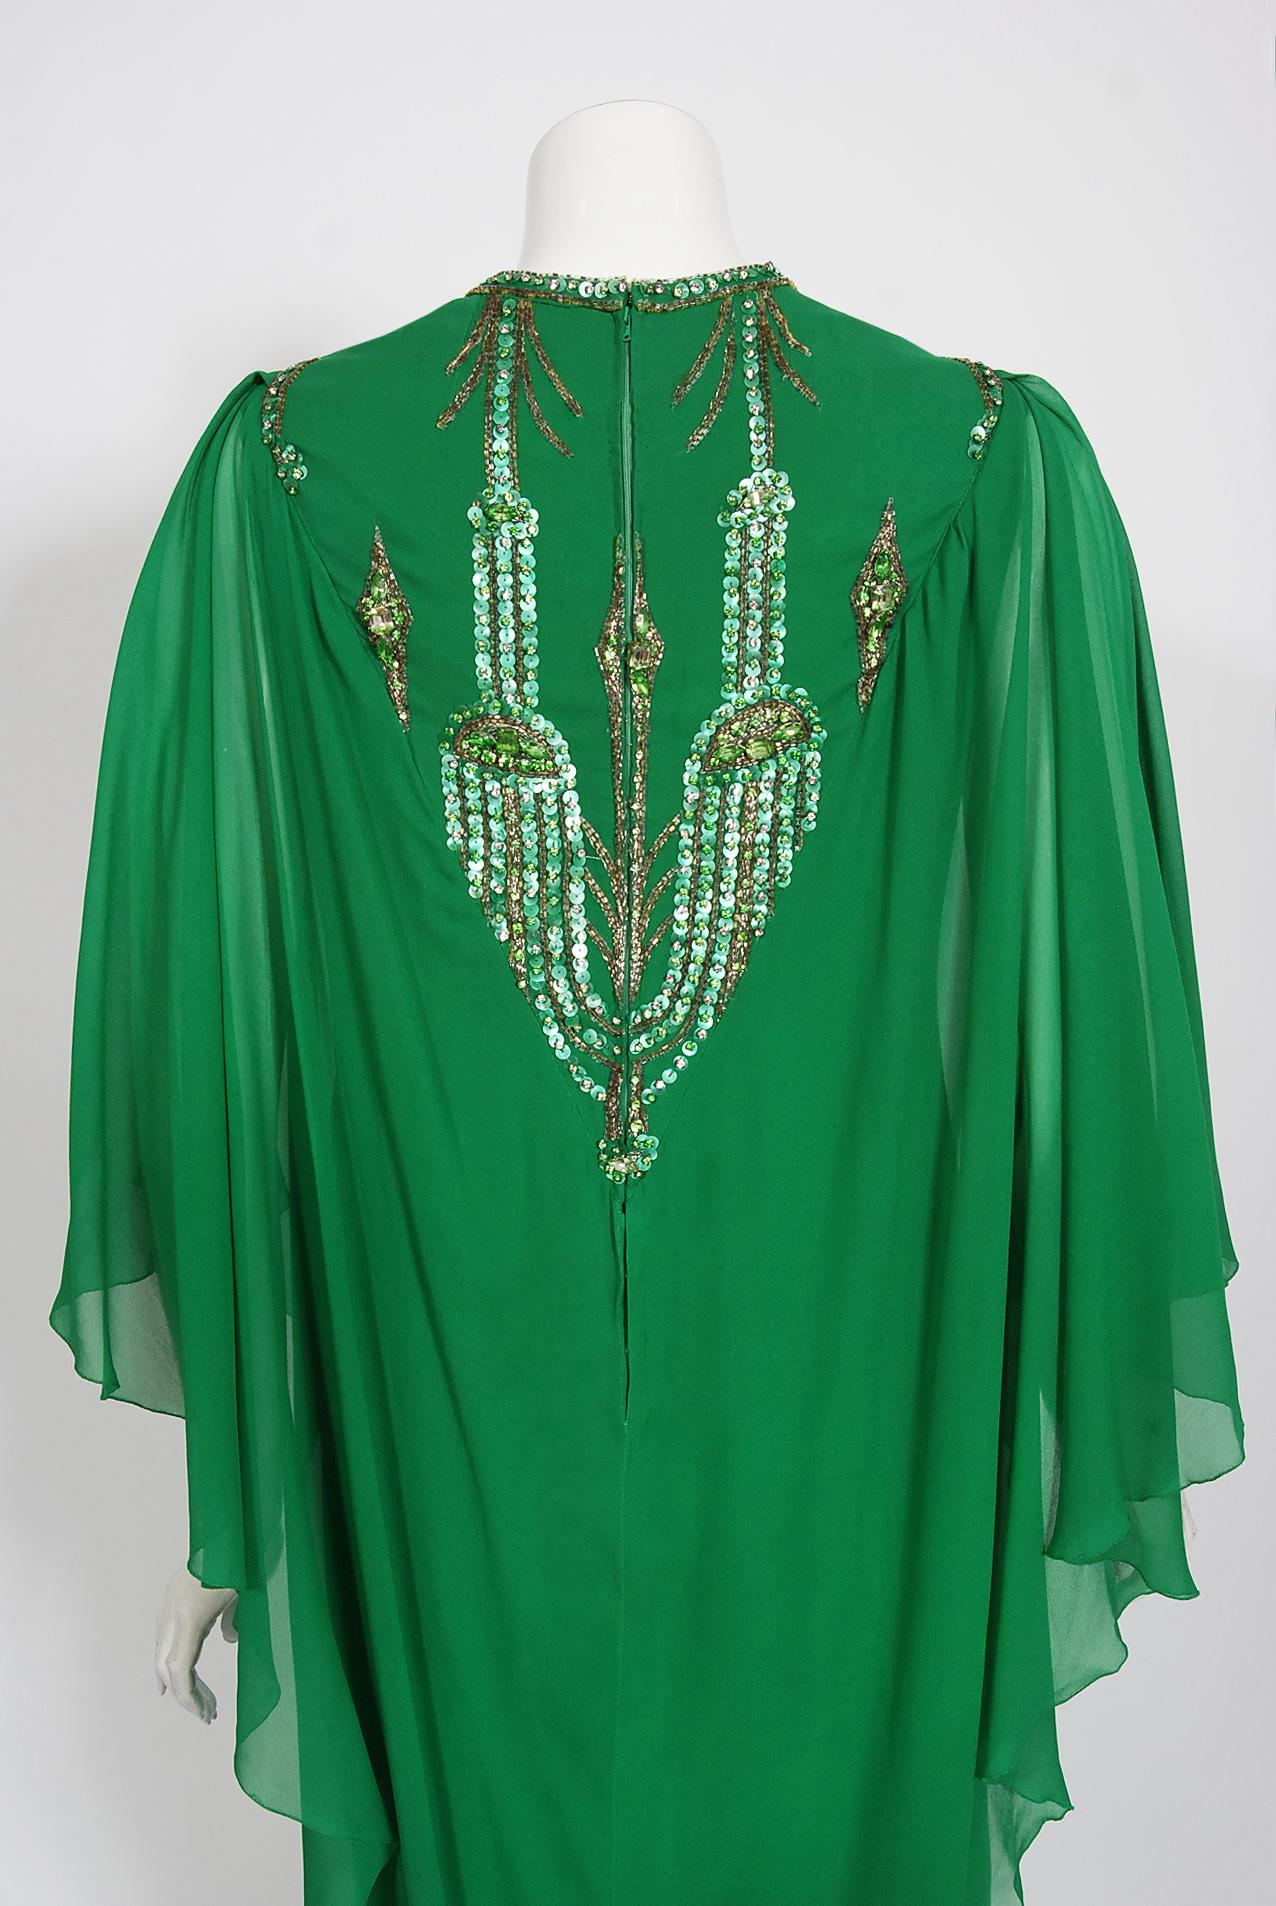 Vintage 1965 Pierre Cardin Haute Couture Beaded Green Silk Chiffon Caftan Gown For Sale 3